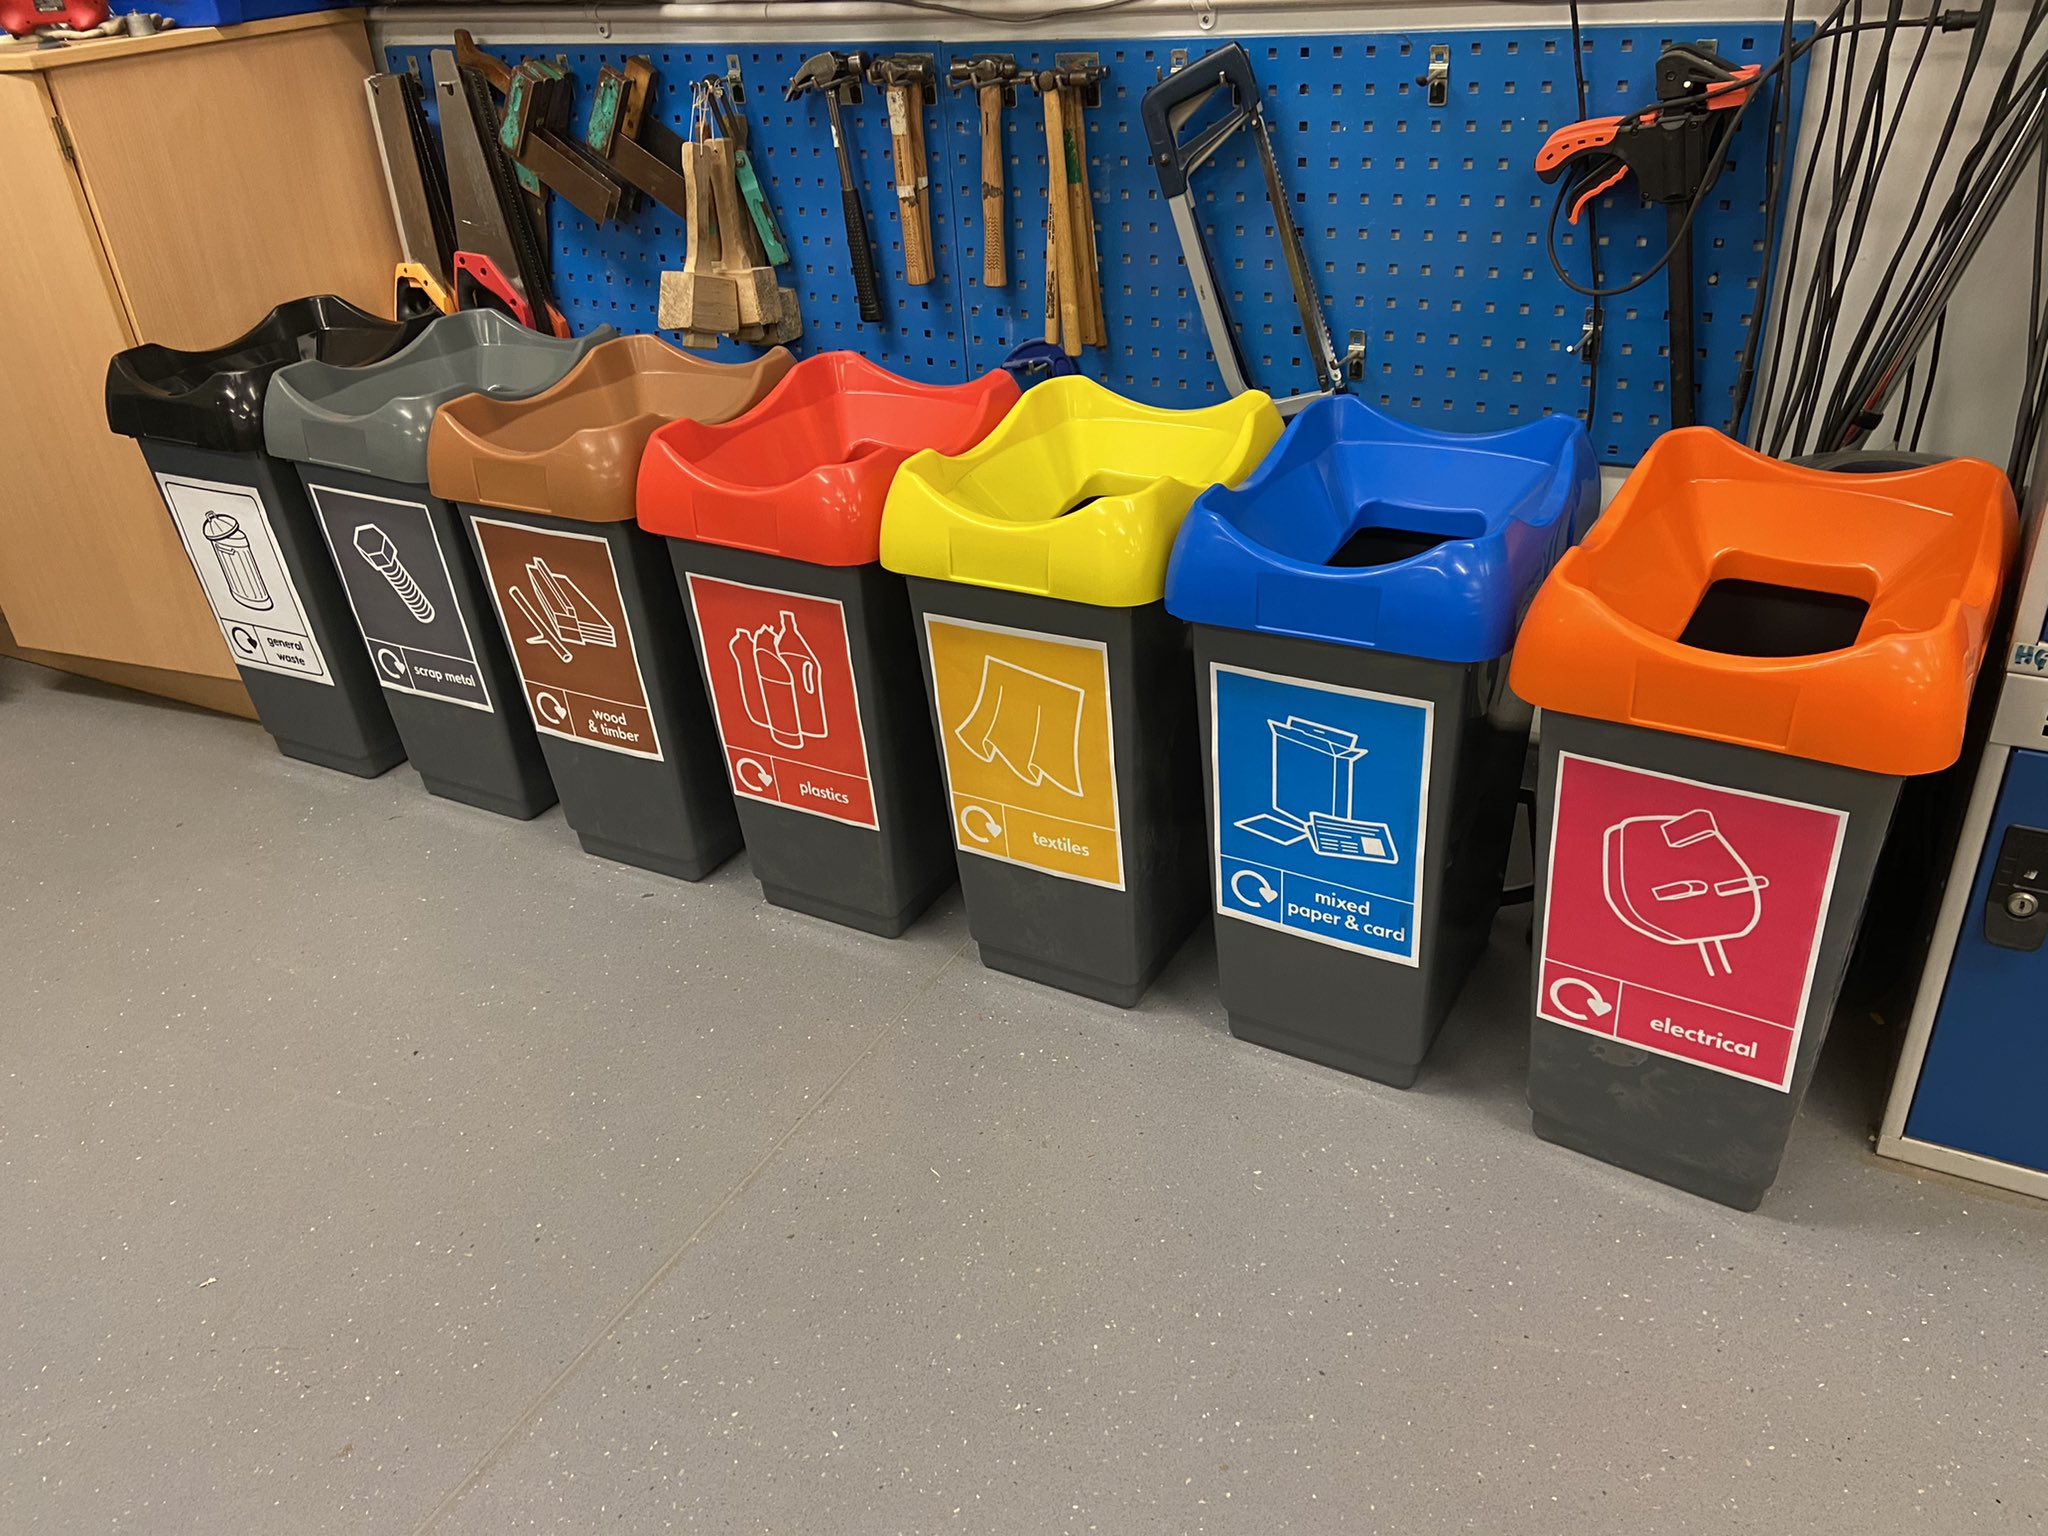 Highgate DTE on Twitter: "Introducing our new recycling bins. Every material will have it's own path to being reused or recycled. #recyclingbins #recycle #mixedwaste #reduce #reuse #repair #refuse #rethink #sustainability https://t.co/0u0ioulr64" /